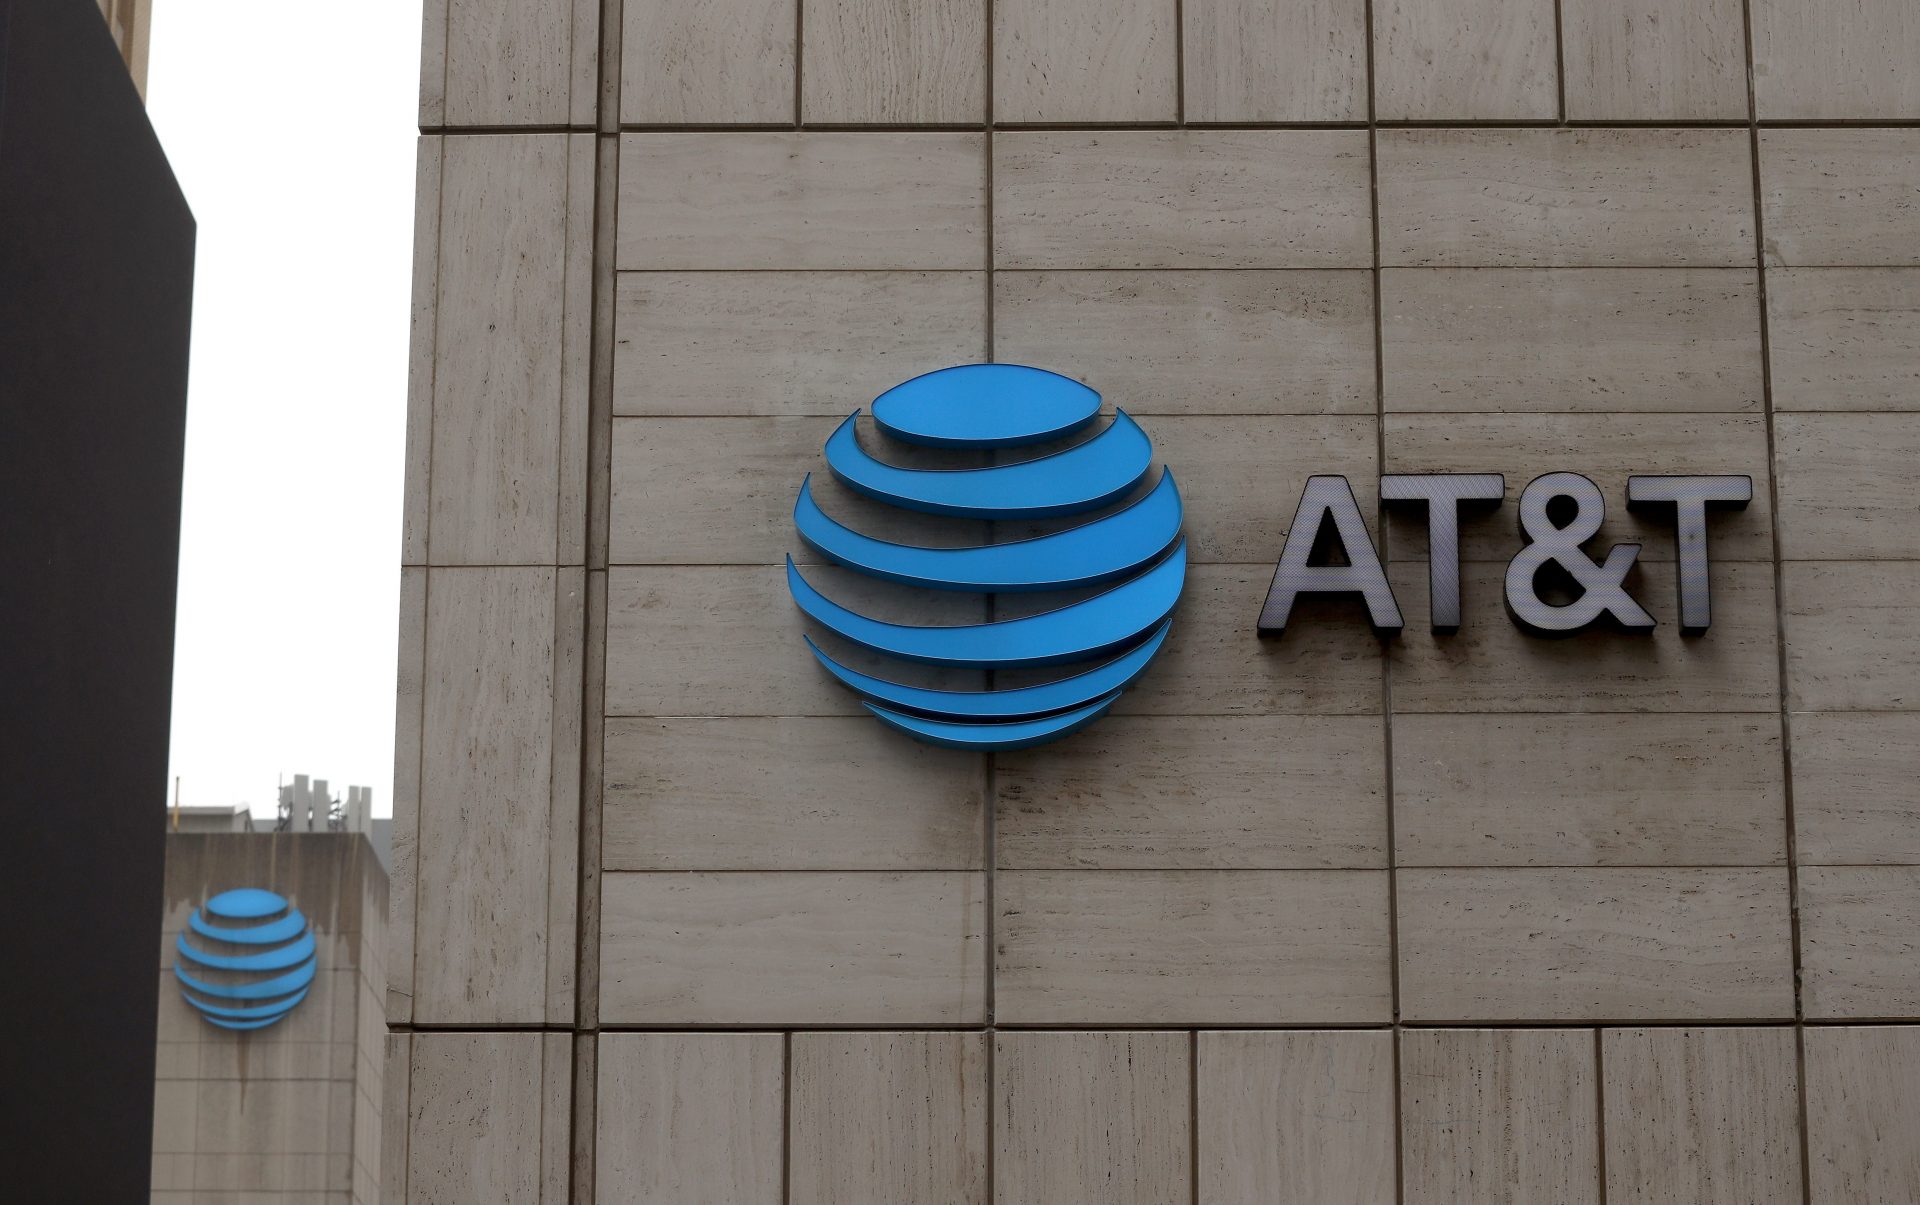 AT&T Is Bankrolling the Community That Championed Trump’s Enormous Lie, “White History Month”